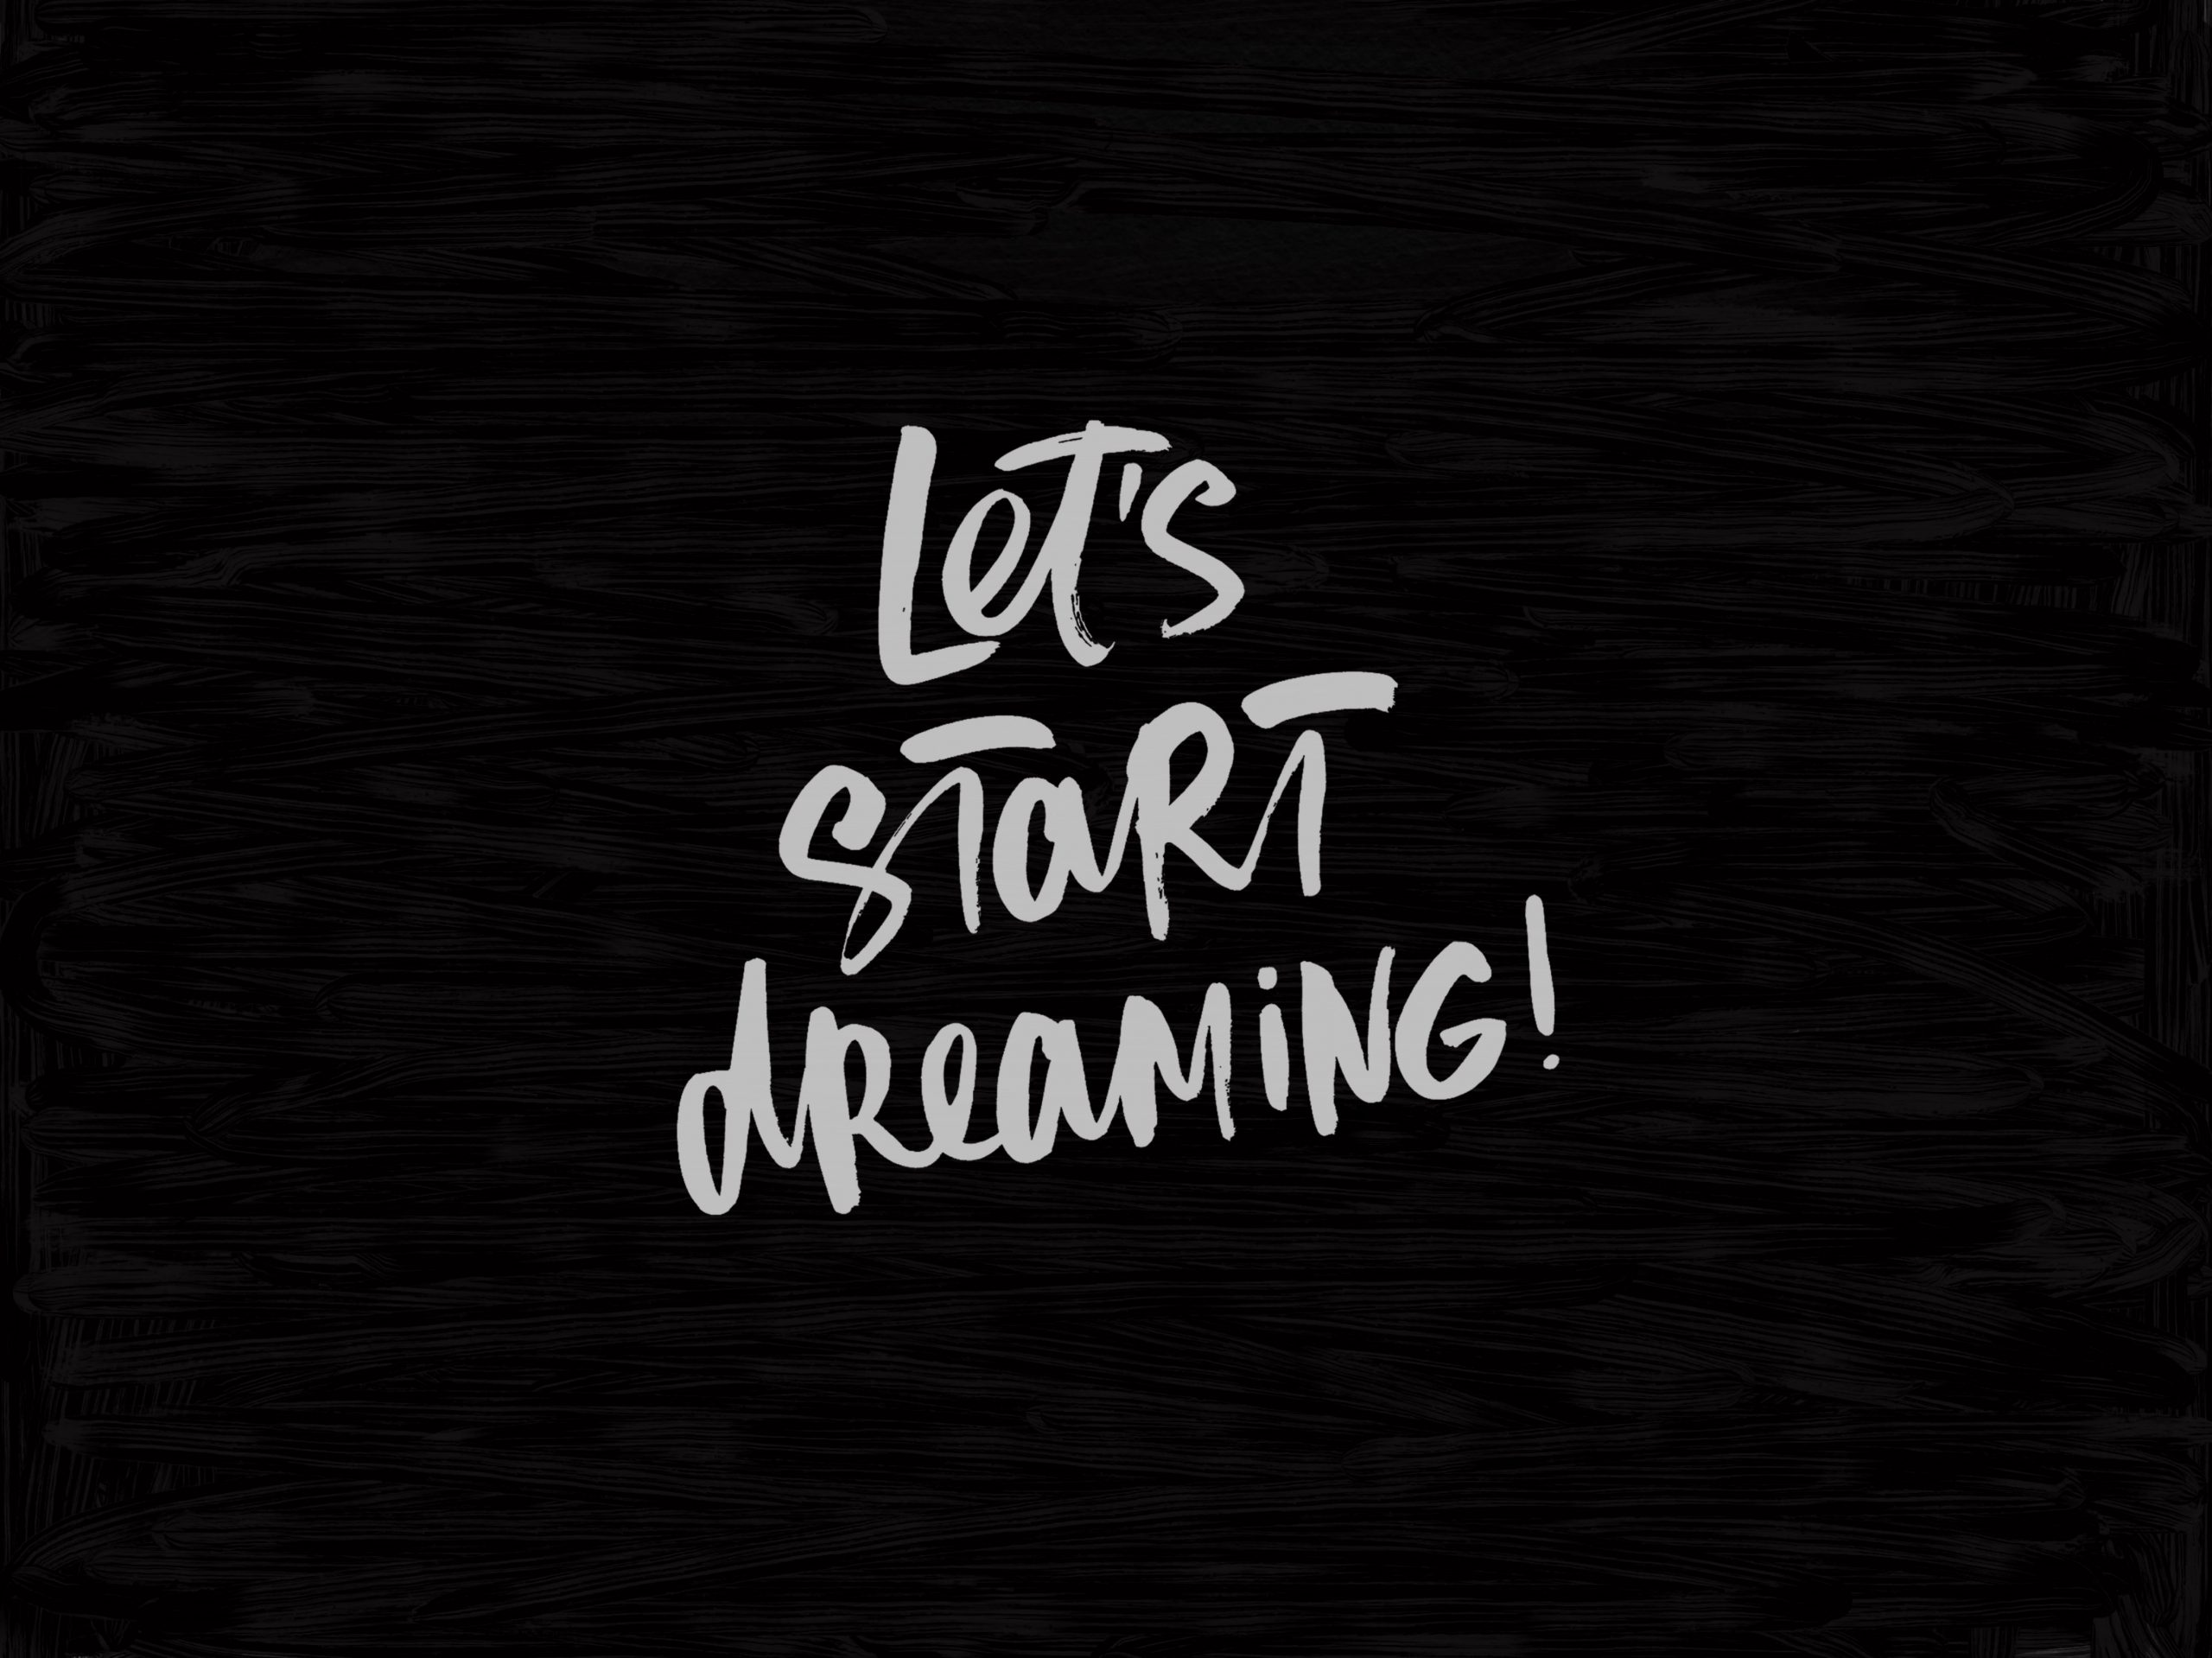 Wallpaper Black Background With Let’s Start Dreaming Text